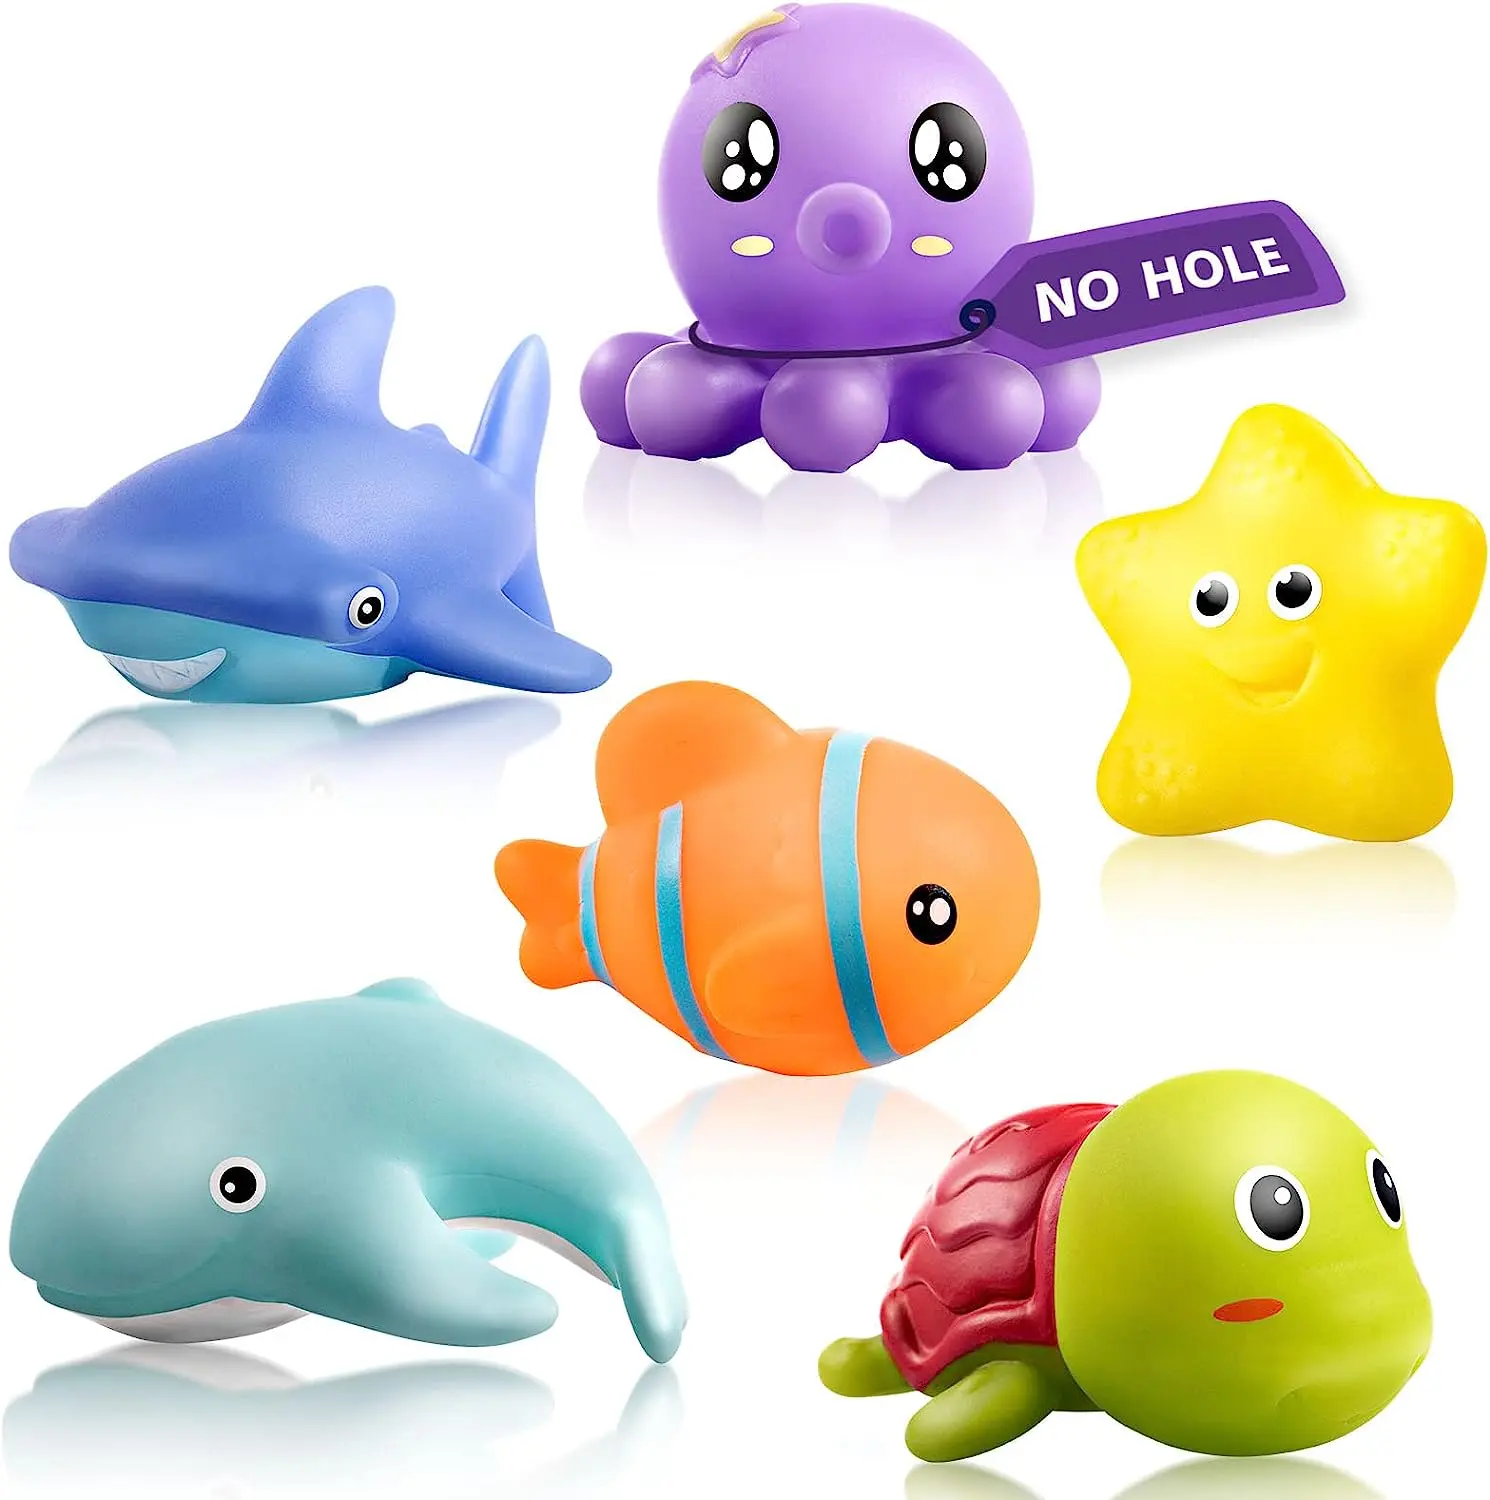 Rubber Turtle Bathroom Mold Free Floating Baby Bath Toy Safe Non Toxic No Mold Squeaky Sounding Sea Animal Whale Child Kids